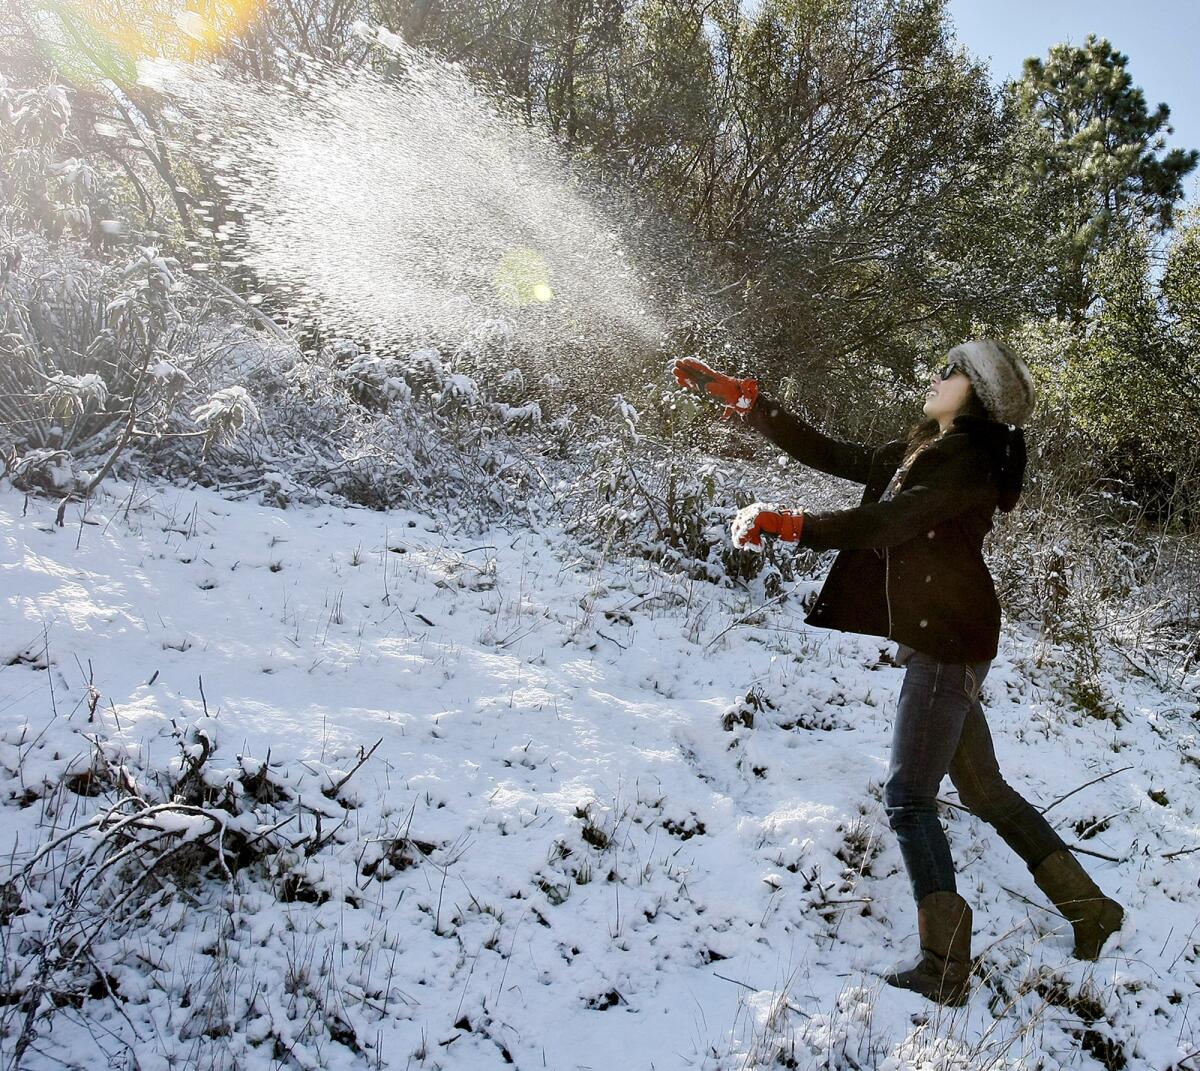 Katia Guerrero, 17 from Monrovia, plays in the snow at Angeles Crest Highway near Angeles Forest Highway in the Angeles National Forest above La Canada Flintridge on Wednesday, February 20, 2013. Guerrero's older sister brought her up to the snow because today is her birthday. A fast-moving storm dumped snow at higher elevations overnight.